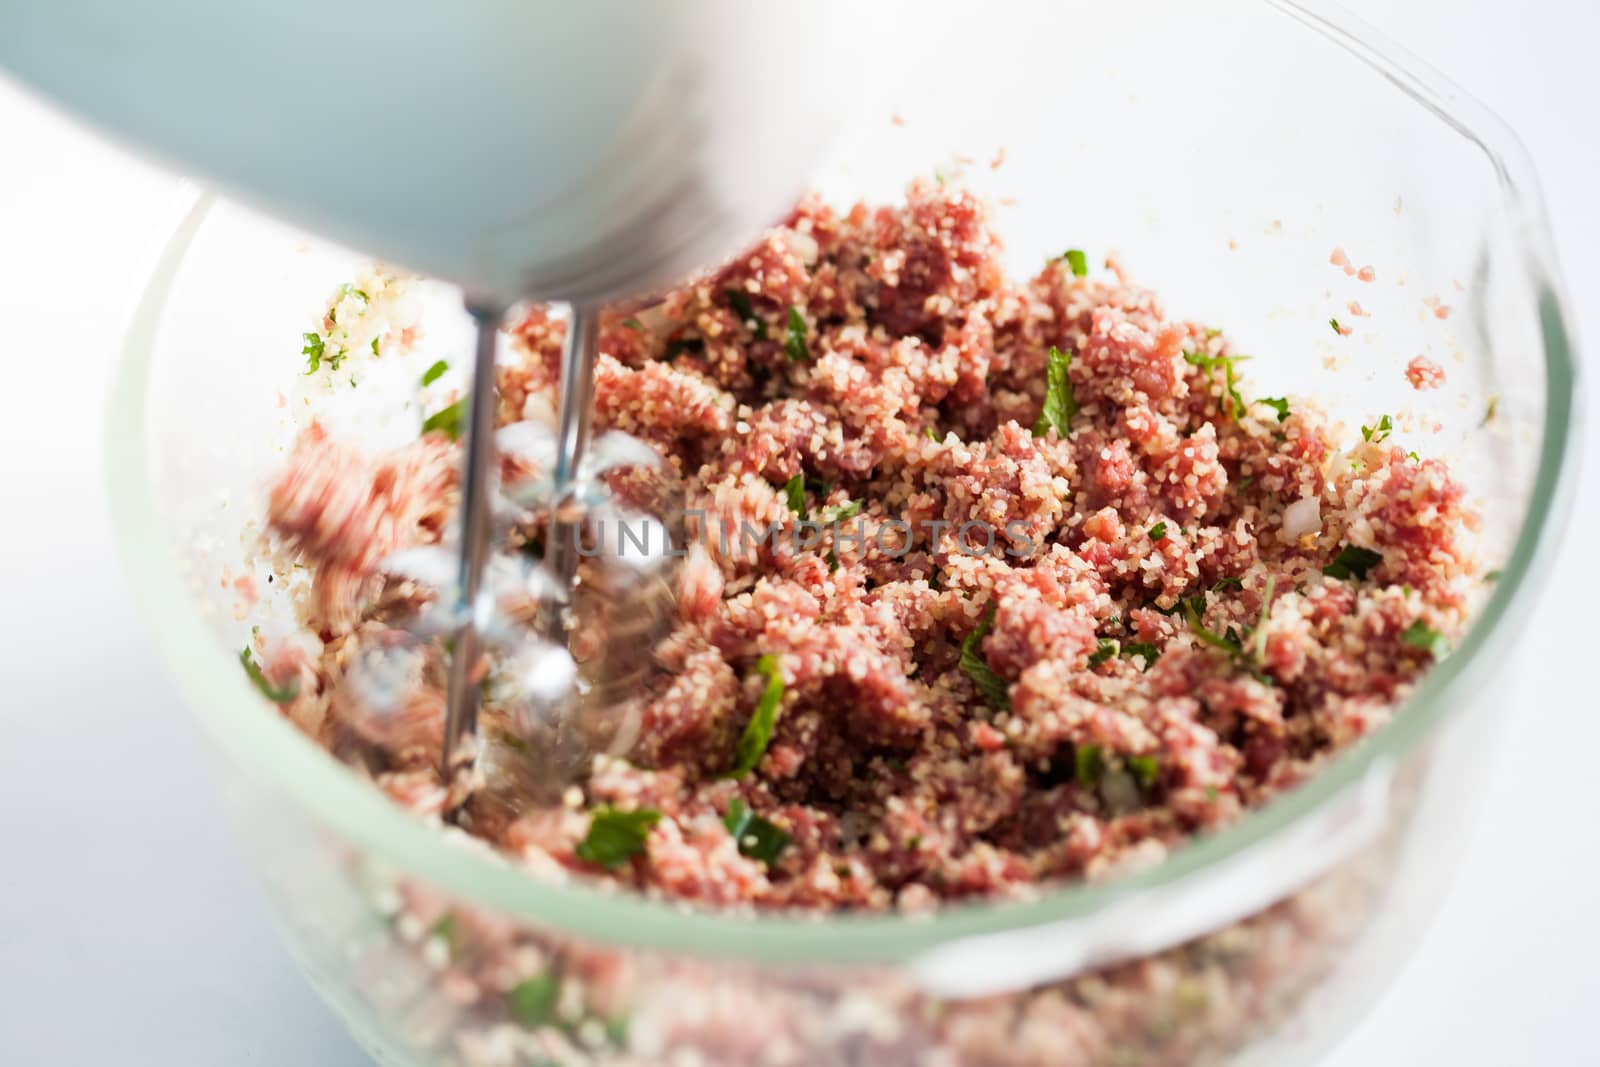 Step by step Levantine cuisine kibbeh preparation : Mixing the ingredients to prepare kibbeh into a bowl